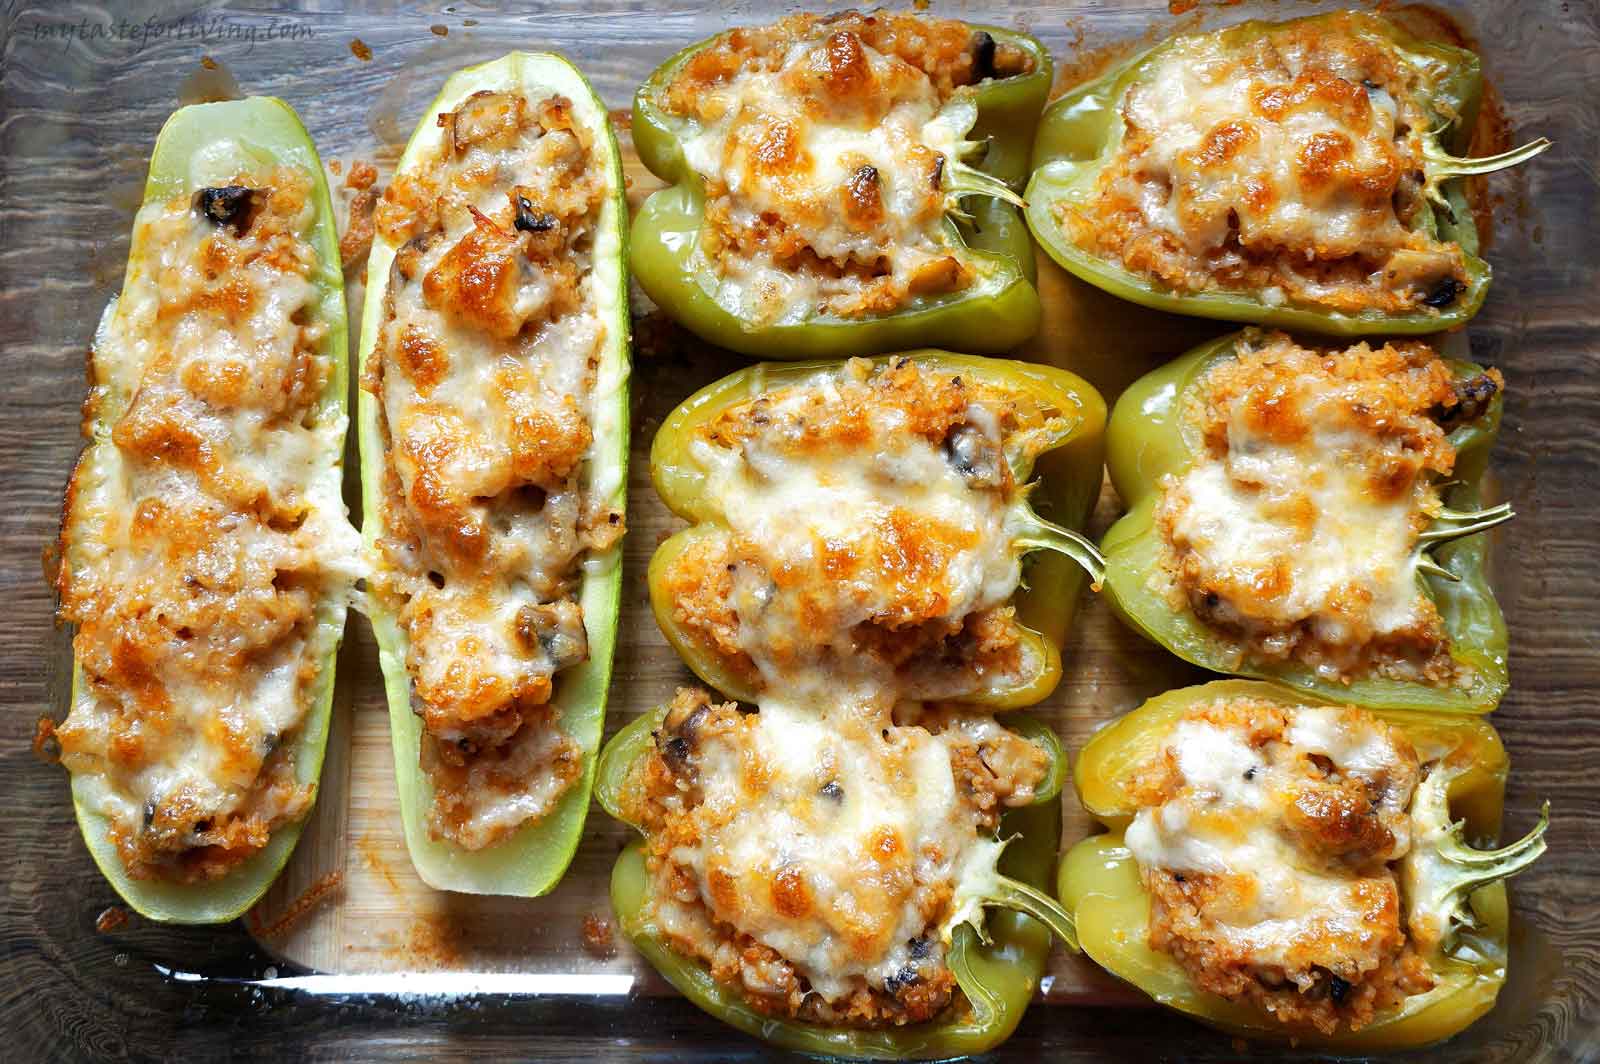 Delicious stuffed zucchini and peppers baked in the oven with bulgur, mushrooms, onions and tomatoes.